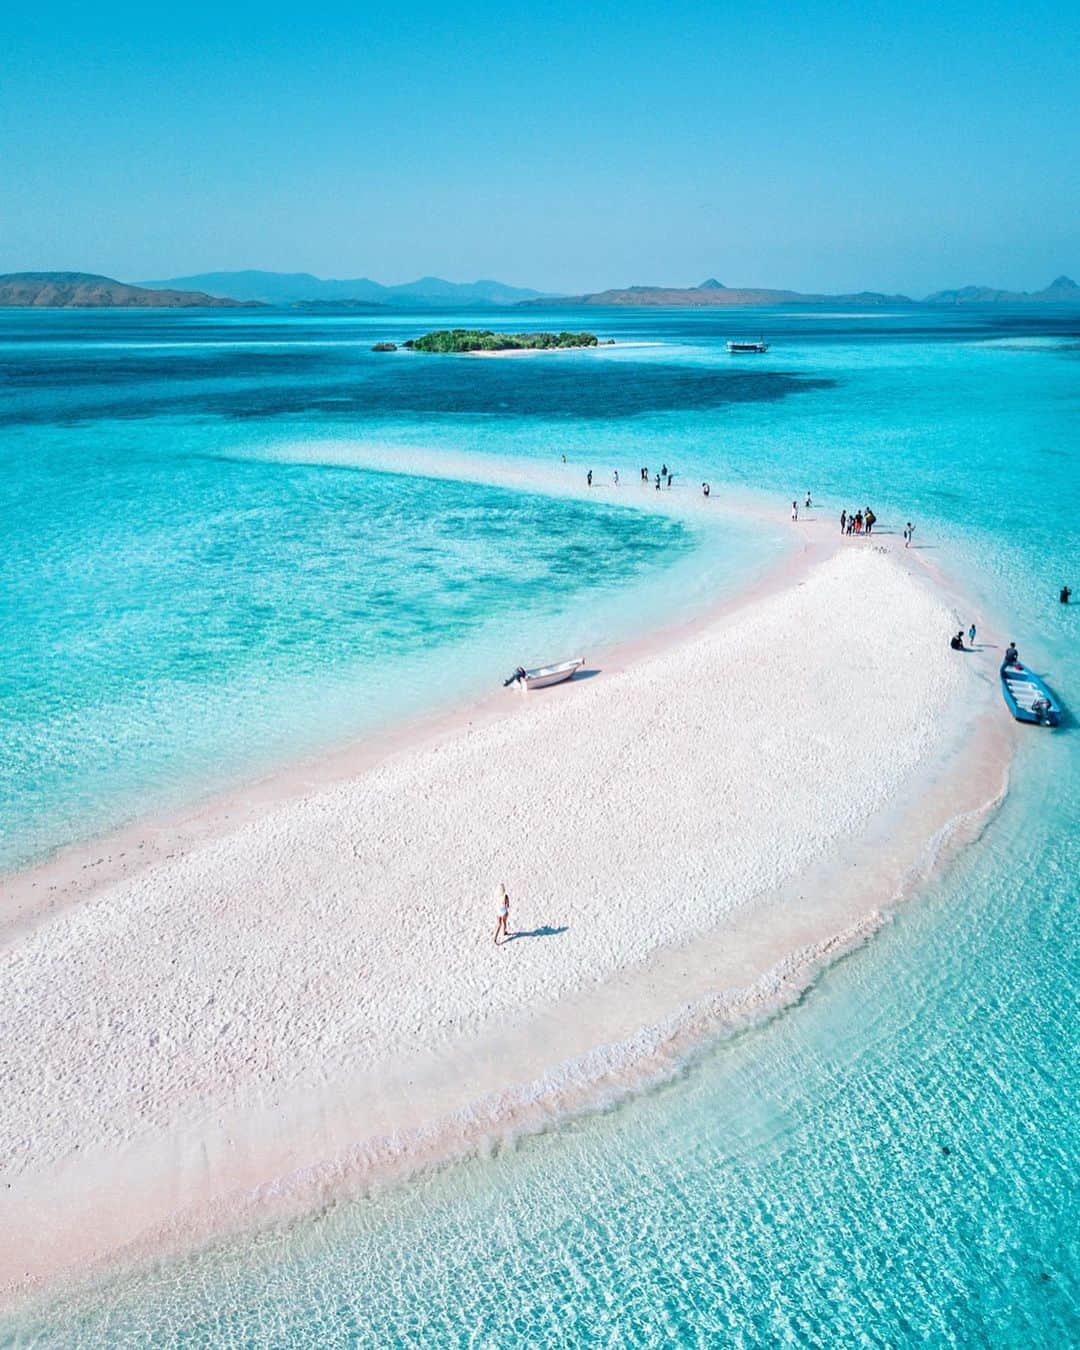 さんのインスタグラム写真 - (Instagram)「Getting lost in the middle of the ocean 🏝 . You’ll find me here exploring this sand bar paradise known as Taka Makassar with @indtravel @pesonaid_travel . It’s a crystal clear turquoise haven accessible by boat in the middle of Komodo national park. To get here you will need to take a boat from Labuan Bajo which is a short flight from Bali ✈️ . It’s places like this that make me realize how much more we need to do to preserve our precious planet 🌏 seeing plastic bottles and rubbish floating in the water through the national park has been heartbreaking. And local kids using plastic bottles as soccer balls 😢 . We’ve been on a mission to travel lighter with reusable bottles, utensils, straws and carry bags. Our boat was equipped to help us travel greener and reduce our footprint. Having fresh, filtered water to refill our reusable bottles is a step in the right direction. For any details about this tour please DM me. . These islands are just so beautiful and unique and need to be taken care of, along with their wildlife inhabitants 🐉 tourism is so important to support the economy of places like this, however we need to all make efforts towards sustainable travel 🌏 . What we can do - . ✨ Carbon offset our flights ✨ Choose direct flights and travel locally where possible ✨ Bring our own reusable drinking bottles, metal straws, utensils, bags, food wraps/containers, shampoo, soap etc ✨ Reduce our waste ✨ Reuse towels/sheets ✨ Bike, sail, walk, take public transport where possible ✨ Support the local economy and cultural heritage - ensure souvenirs are made locally and not made and shipped from another country. . I’ve learnt so much more on this trip about climate change and that we are at a critical tipping point. We all have the power to make a change. It’s absolutely essential to the health of our planet 🌏 . #WonderfulIndonesia #FamTripInfluencer2019 #LabuanBajo #funinlabuanbajo #sponsored #ad #komodo #komodonationalpark #indonesia #wonderfullindoneisa #visitindonesia #takamakassar #wonderful_places #beachesnresorts #beautifuldestinations #earthpix #earthfocus #djiglobal #iamtb #travelblogger #labuanbajo #flores #drone #womenwhodrone #sustainabletravel」9月2日 21時02分 - helen_jannesonbense